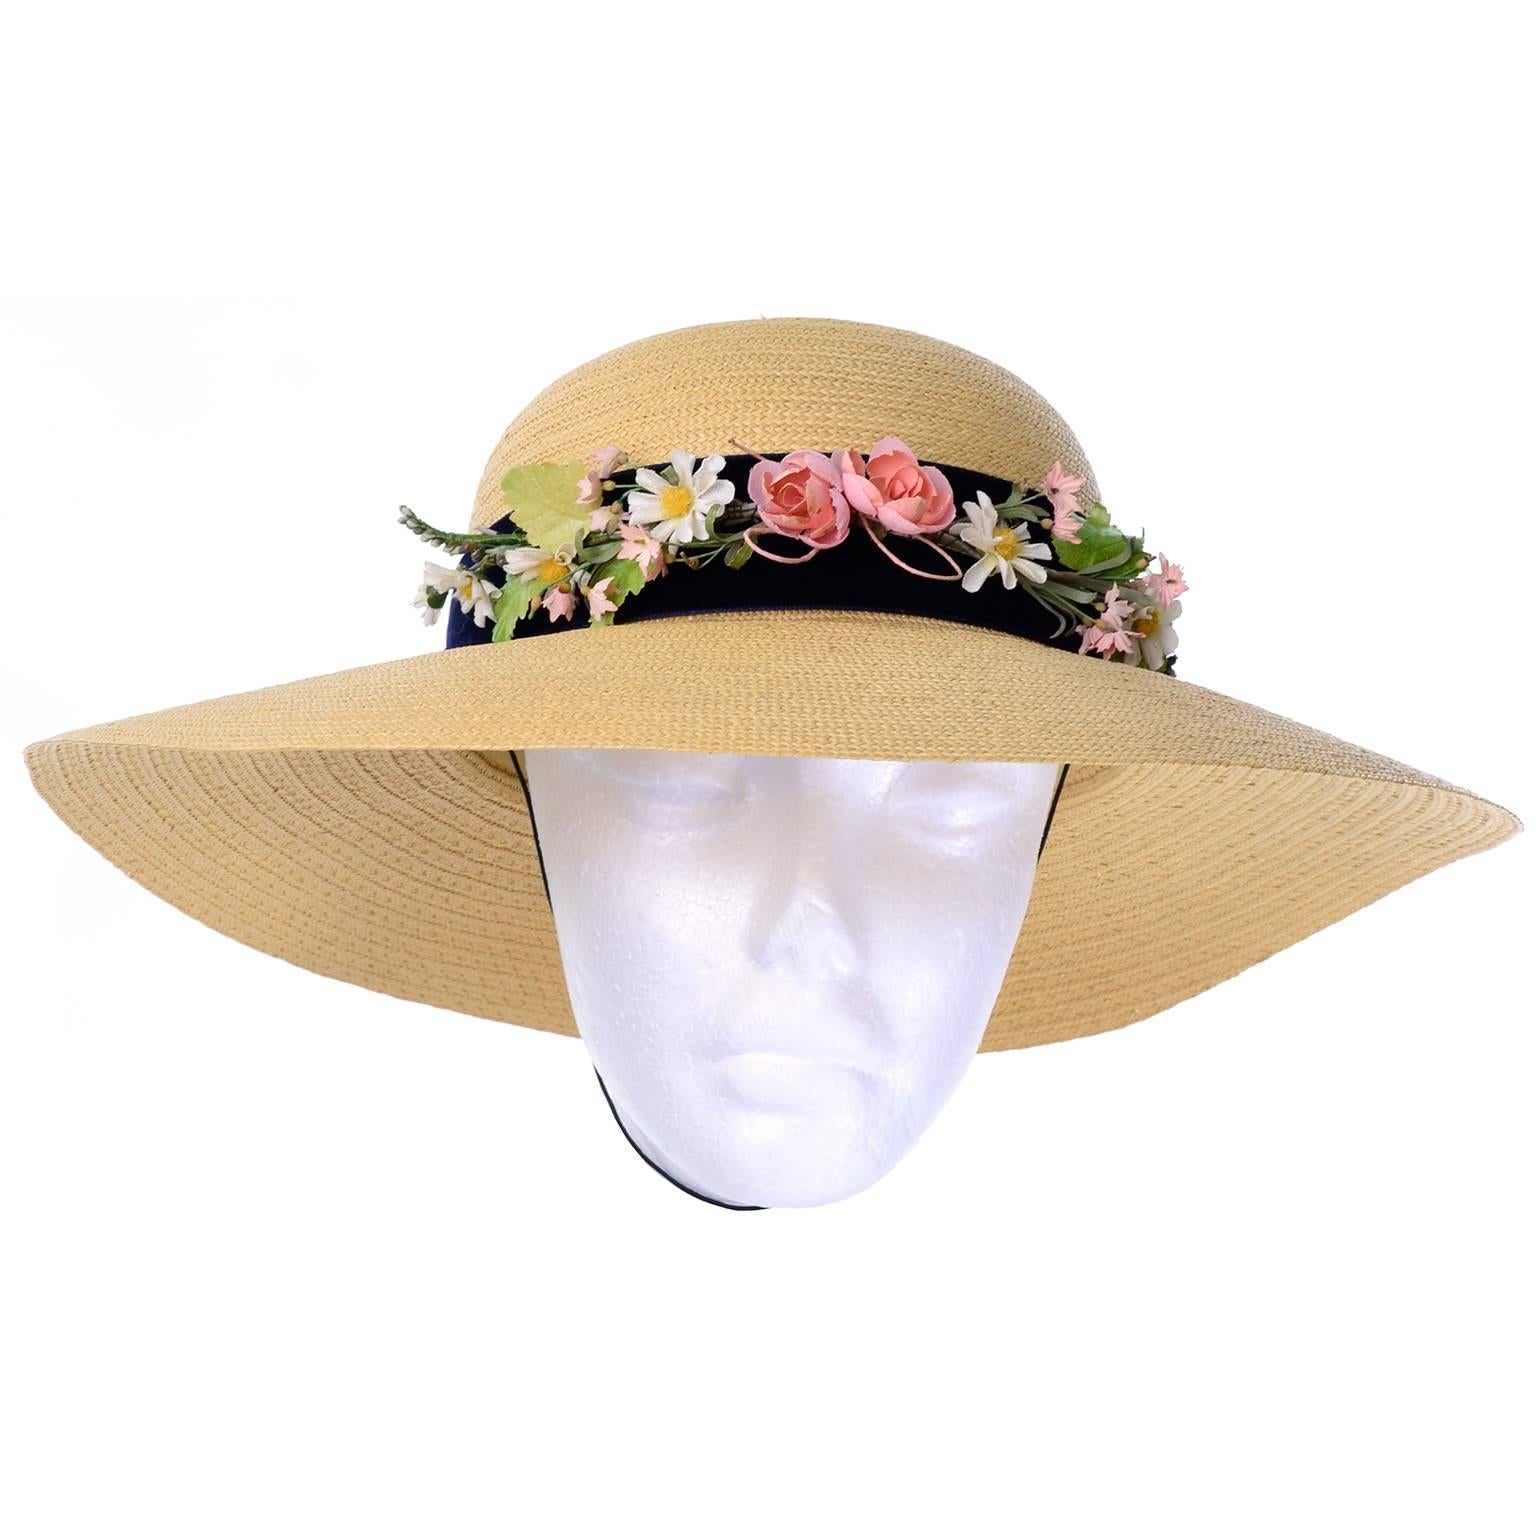 vintage straw hat with ribbon